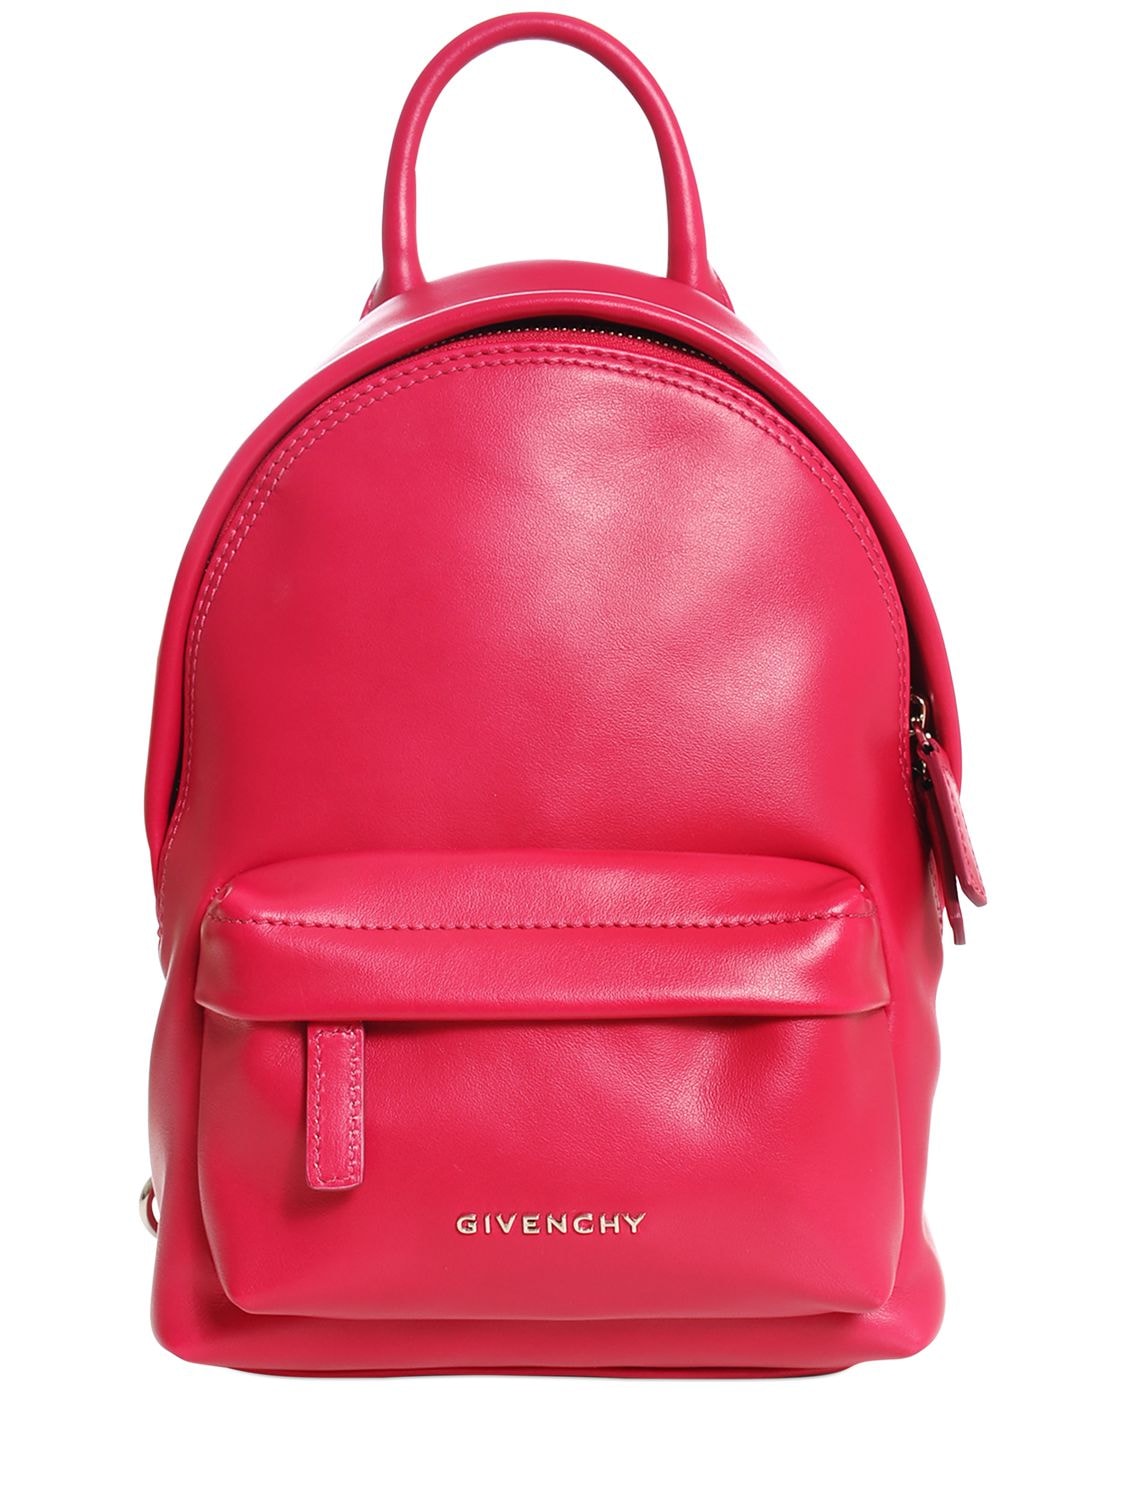 Givenchy Nano Smooth Leather Backpack In Fuchsia